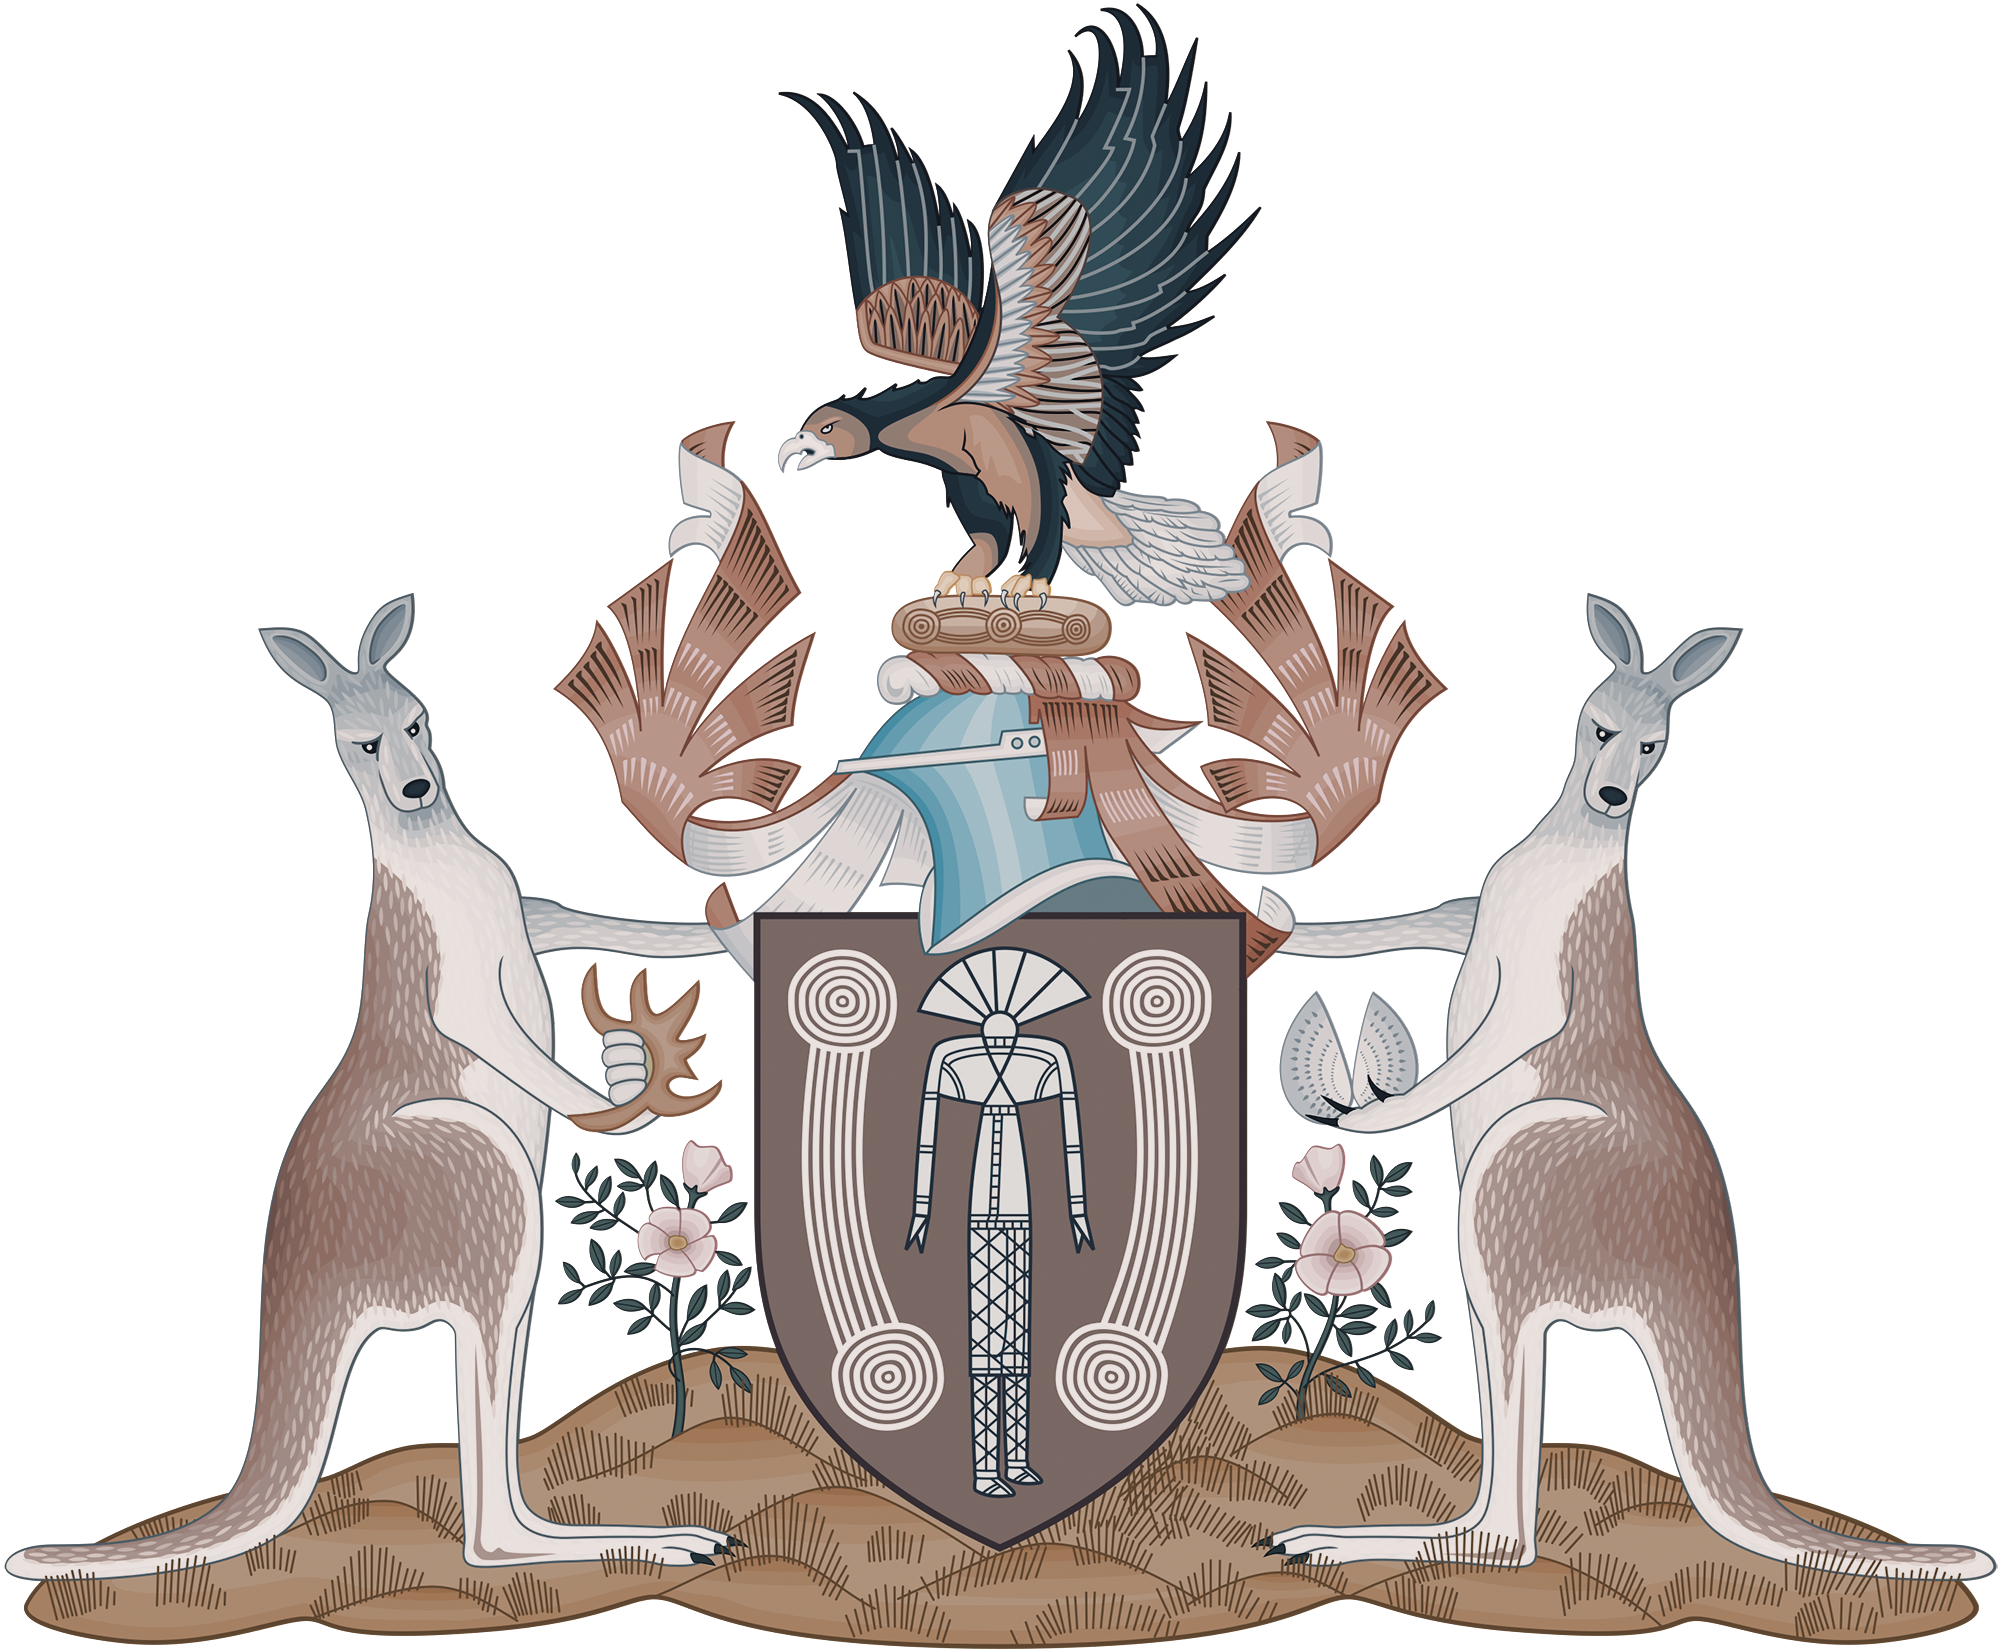 The Coat of Arms of the Northern Territory